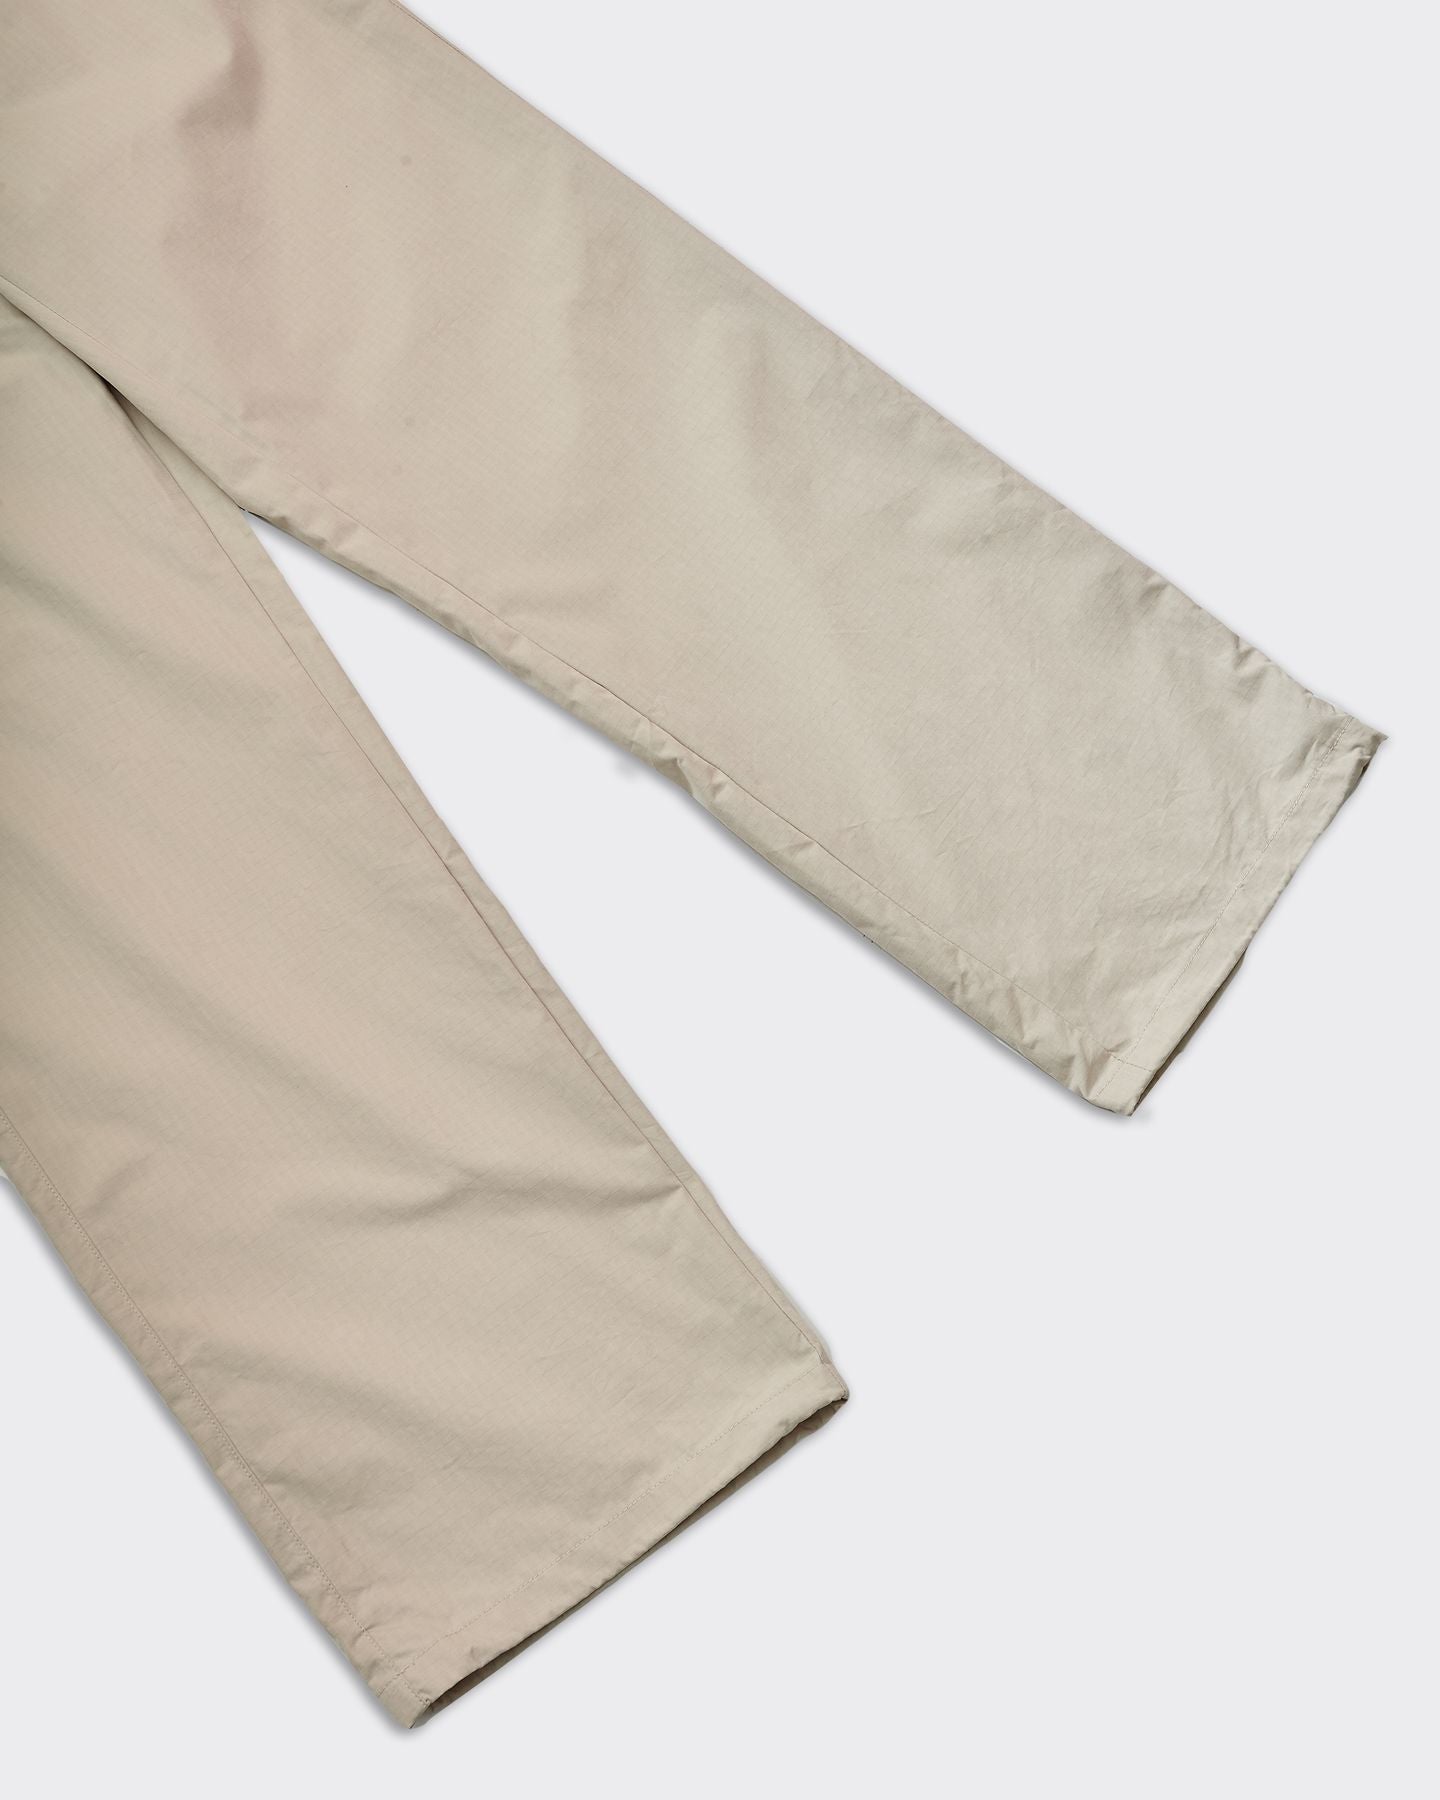 Peter Crema trousers